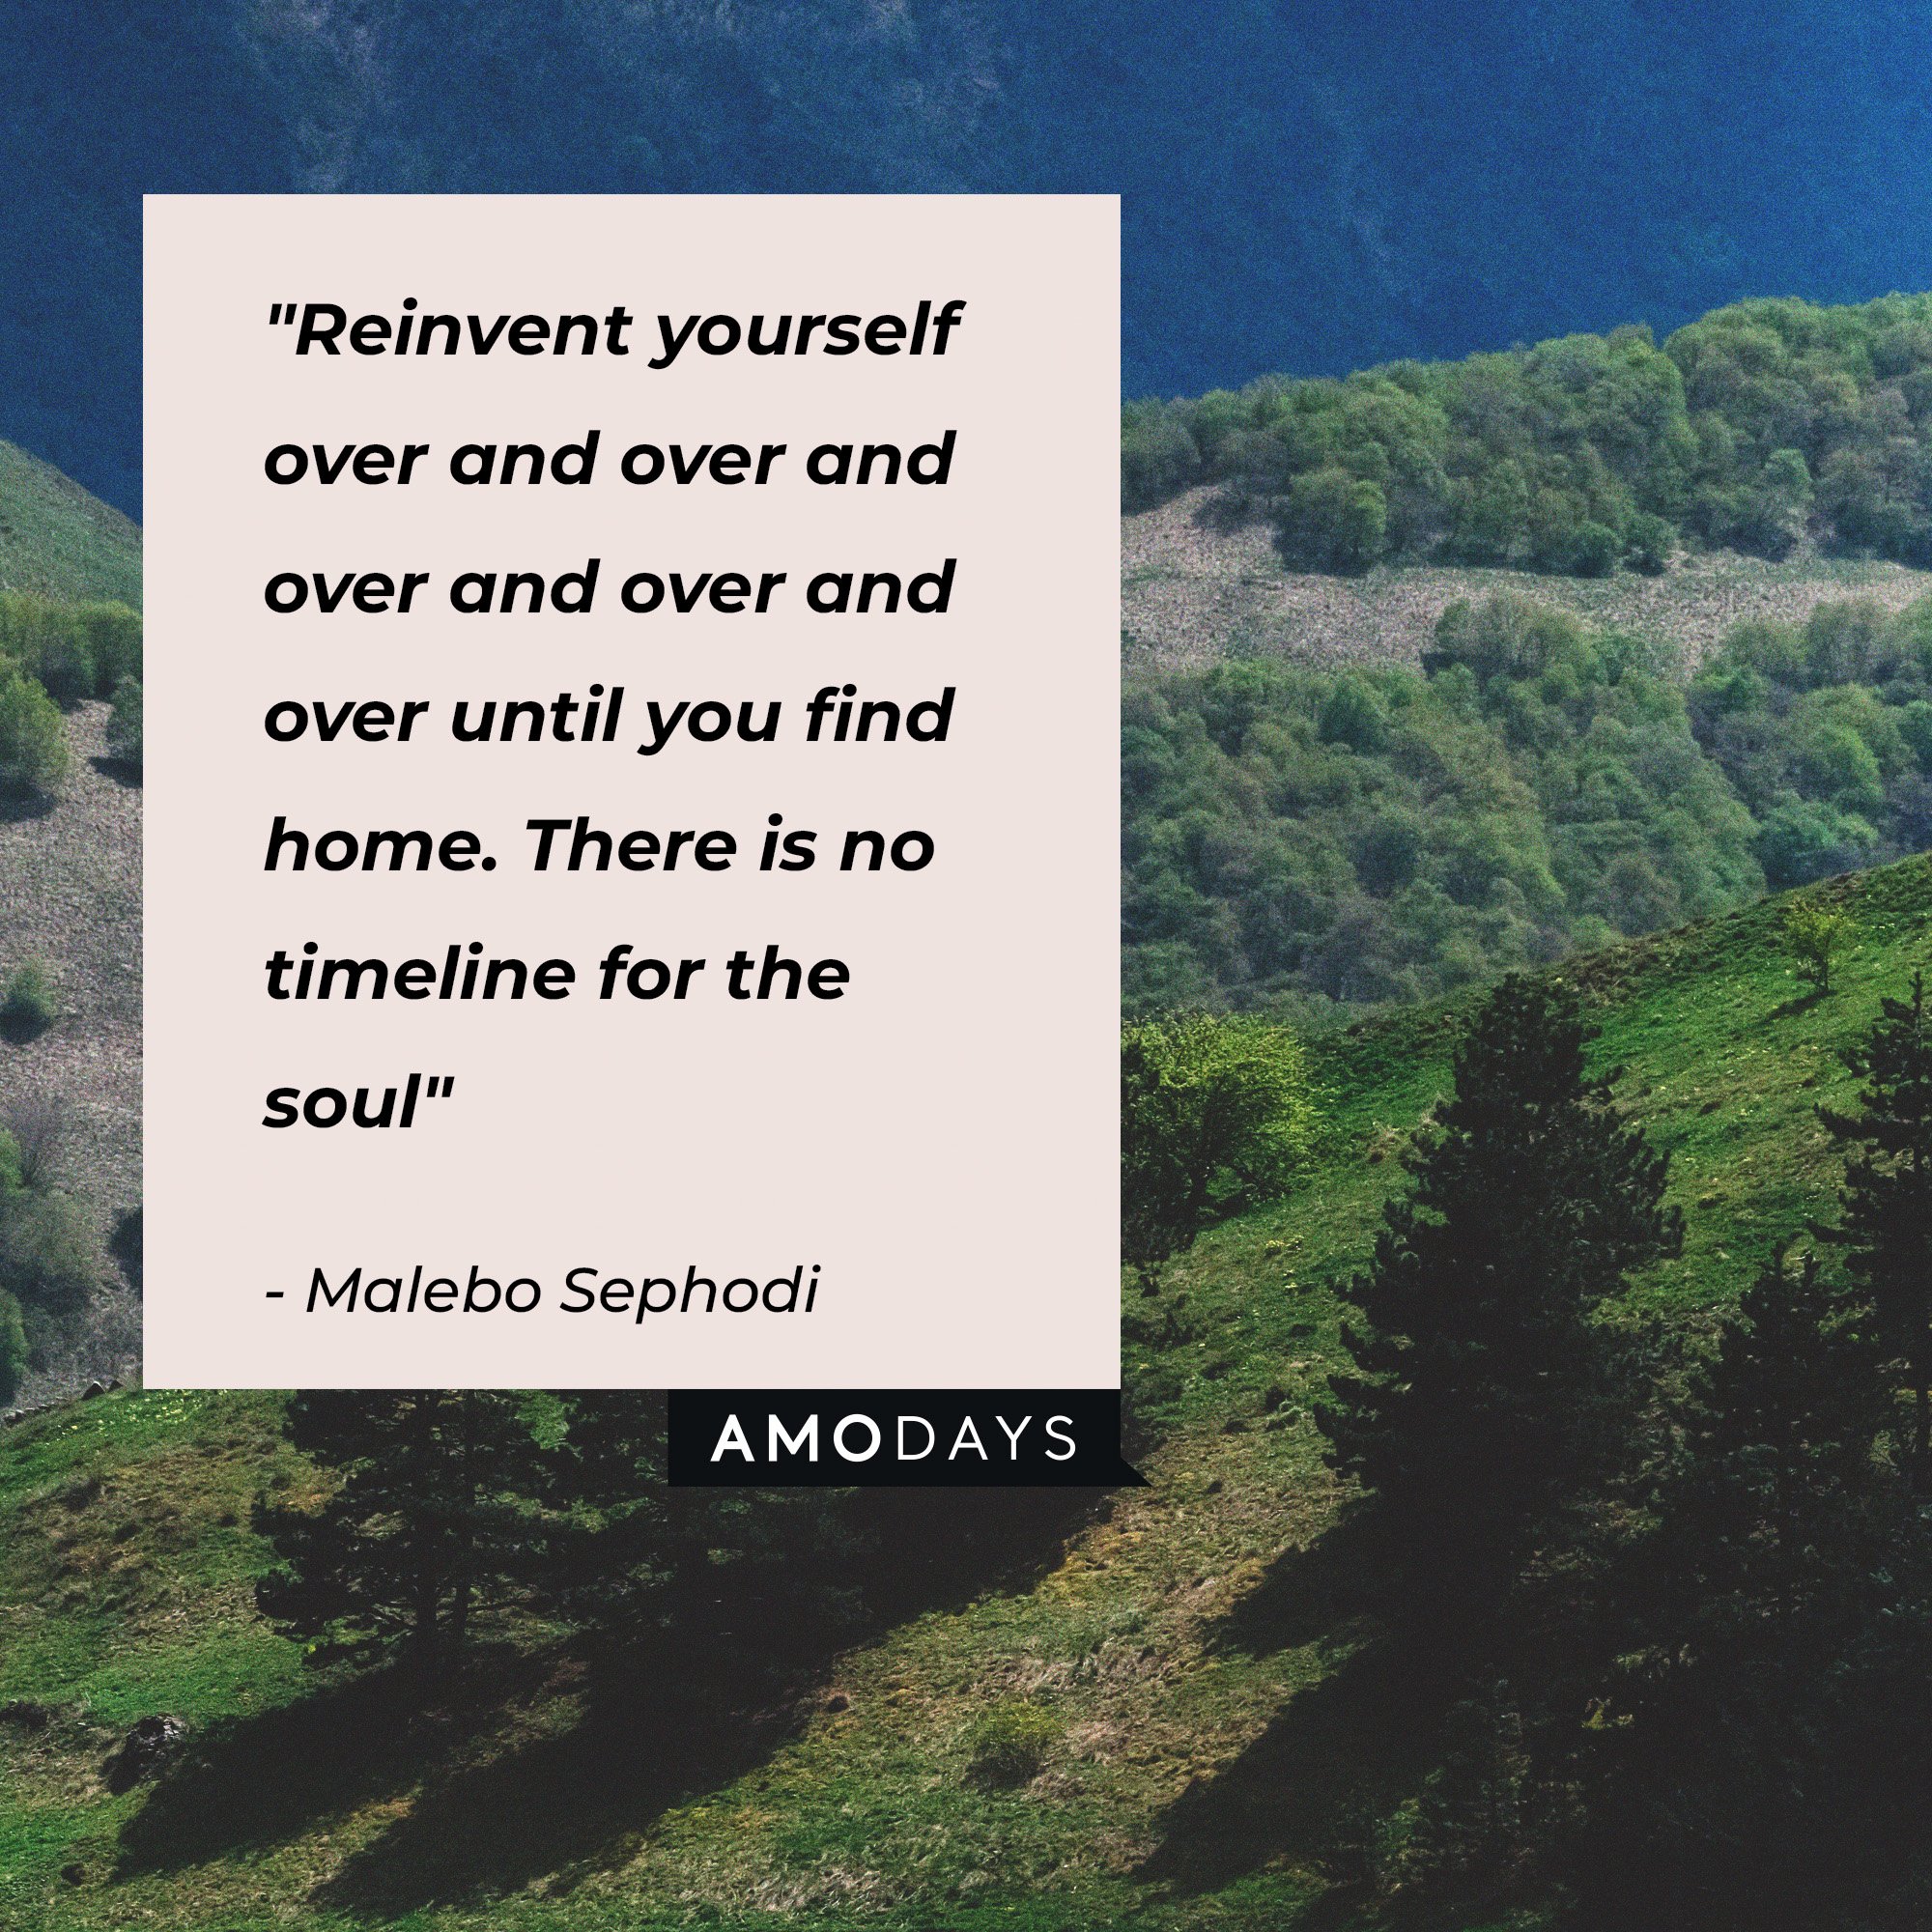 Malebo Sephodi's quote: “Reinvent yourself over and over and over and over and over until you find home. There is no timeline for the soul.” | Image: AmoDays